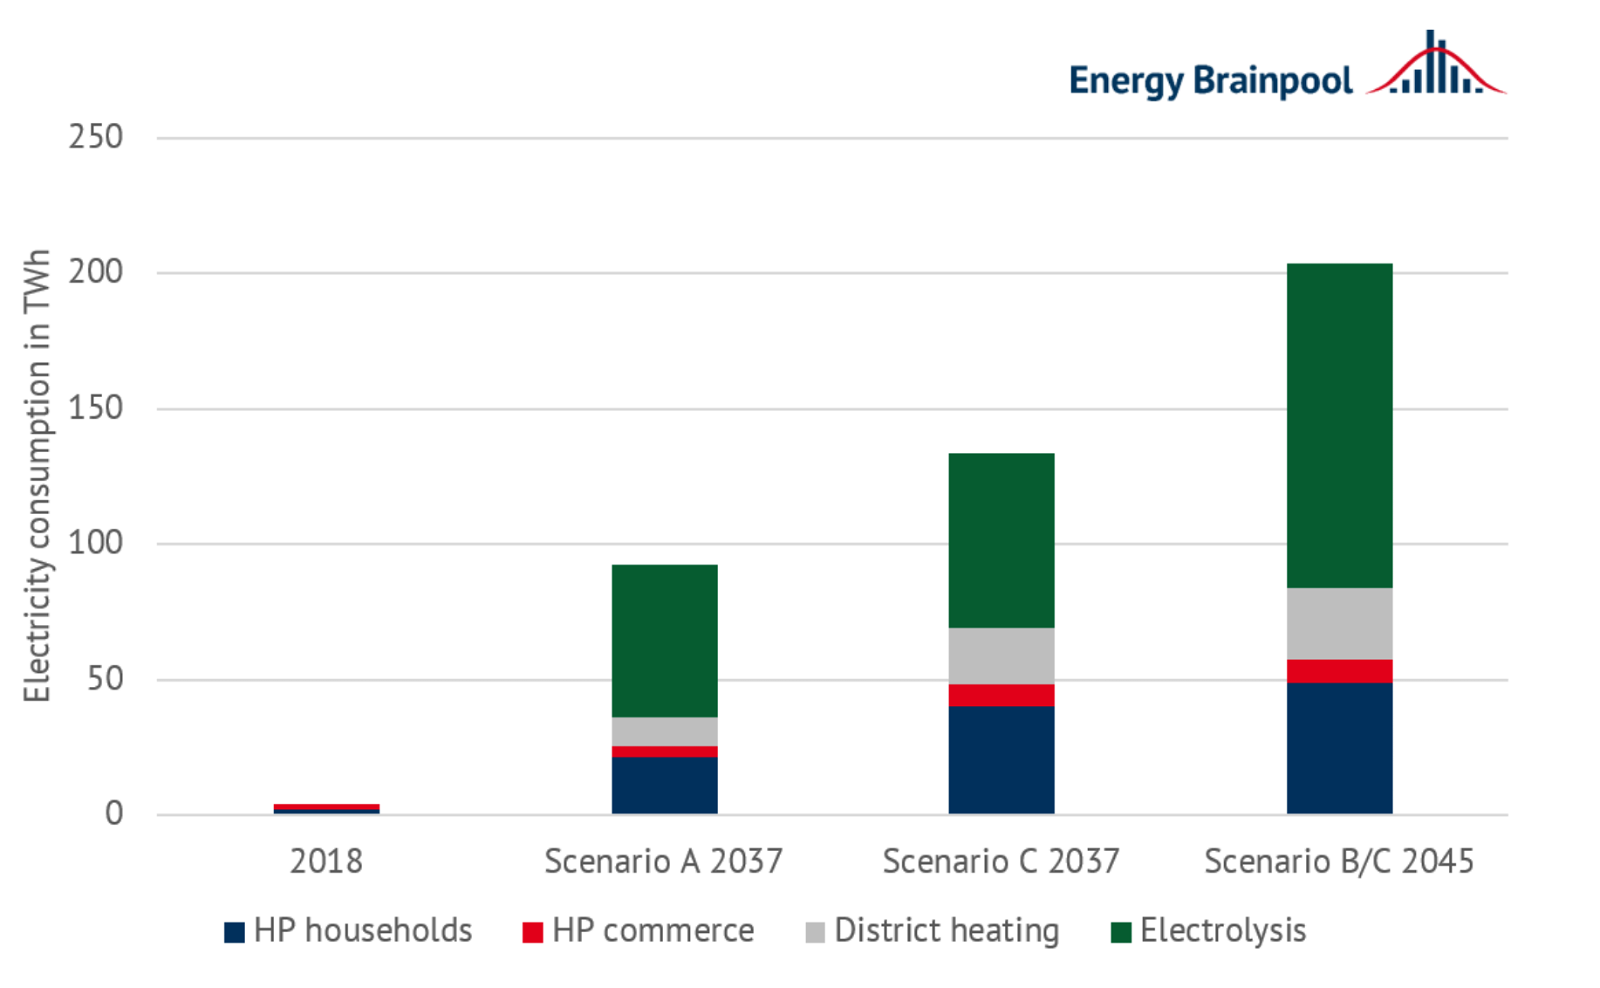 Figure 5: electricity consumption by electrolysis to produce hydrogen and in the heating sector by heat pumps (HP) and electrode boilers in TWh by scenario (source: Energy Brainpool)